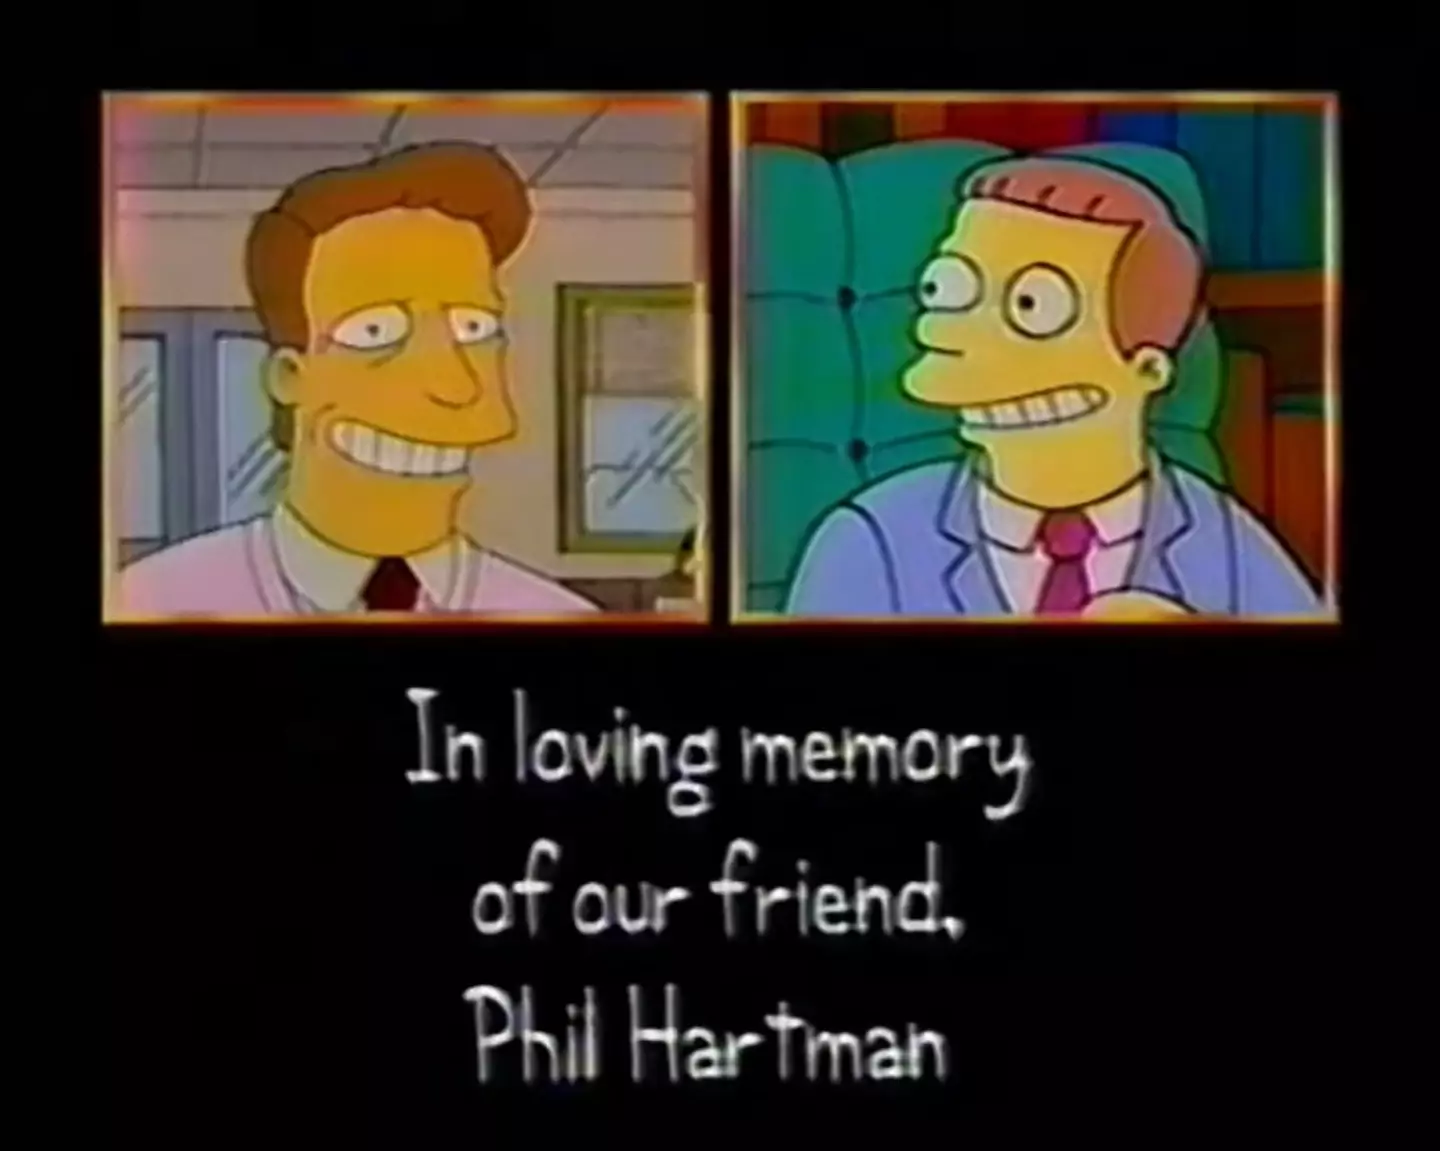 Hartman's final episode on The Simpsons carried a tribute to his memory. (20th Century Fox)